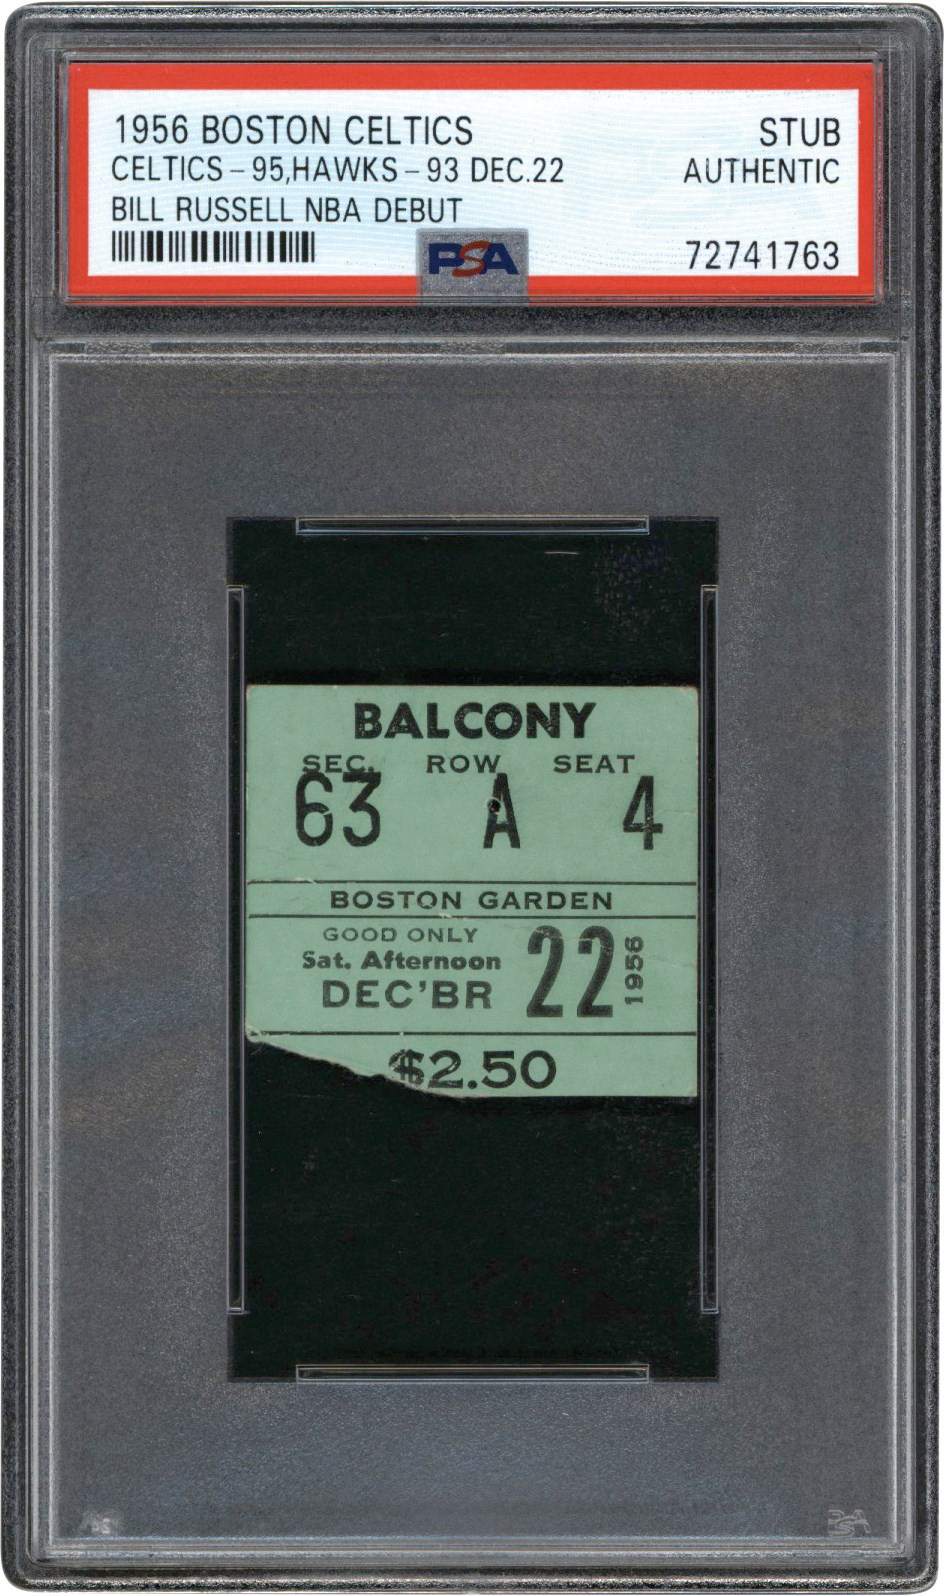 December 22,1956, Bill Russell NBA Debut Ticket Stub PSA Authentic (1 of 1 Only Known Example)